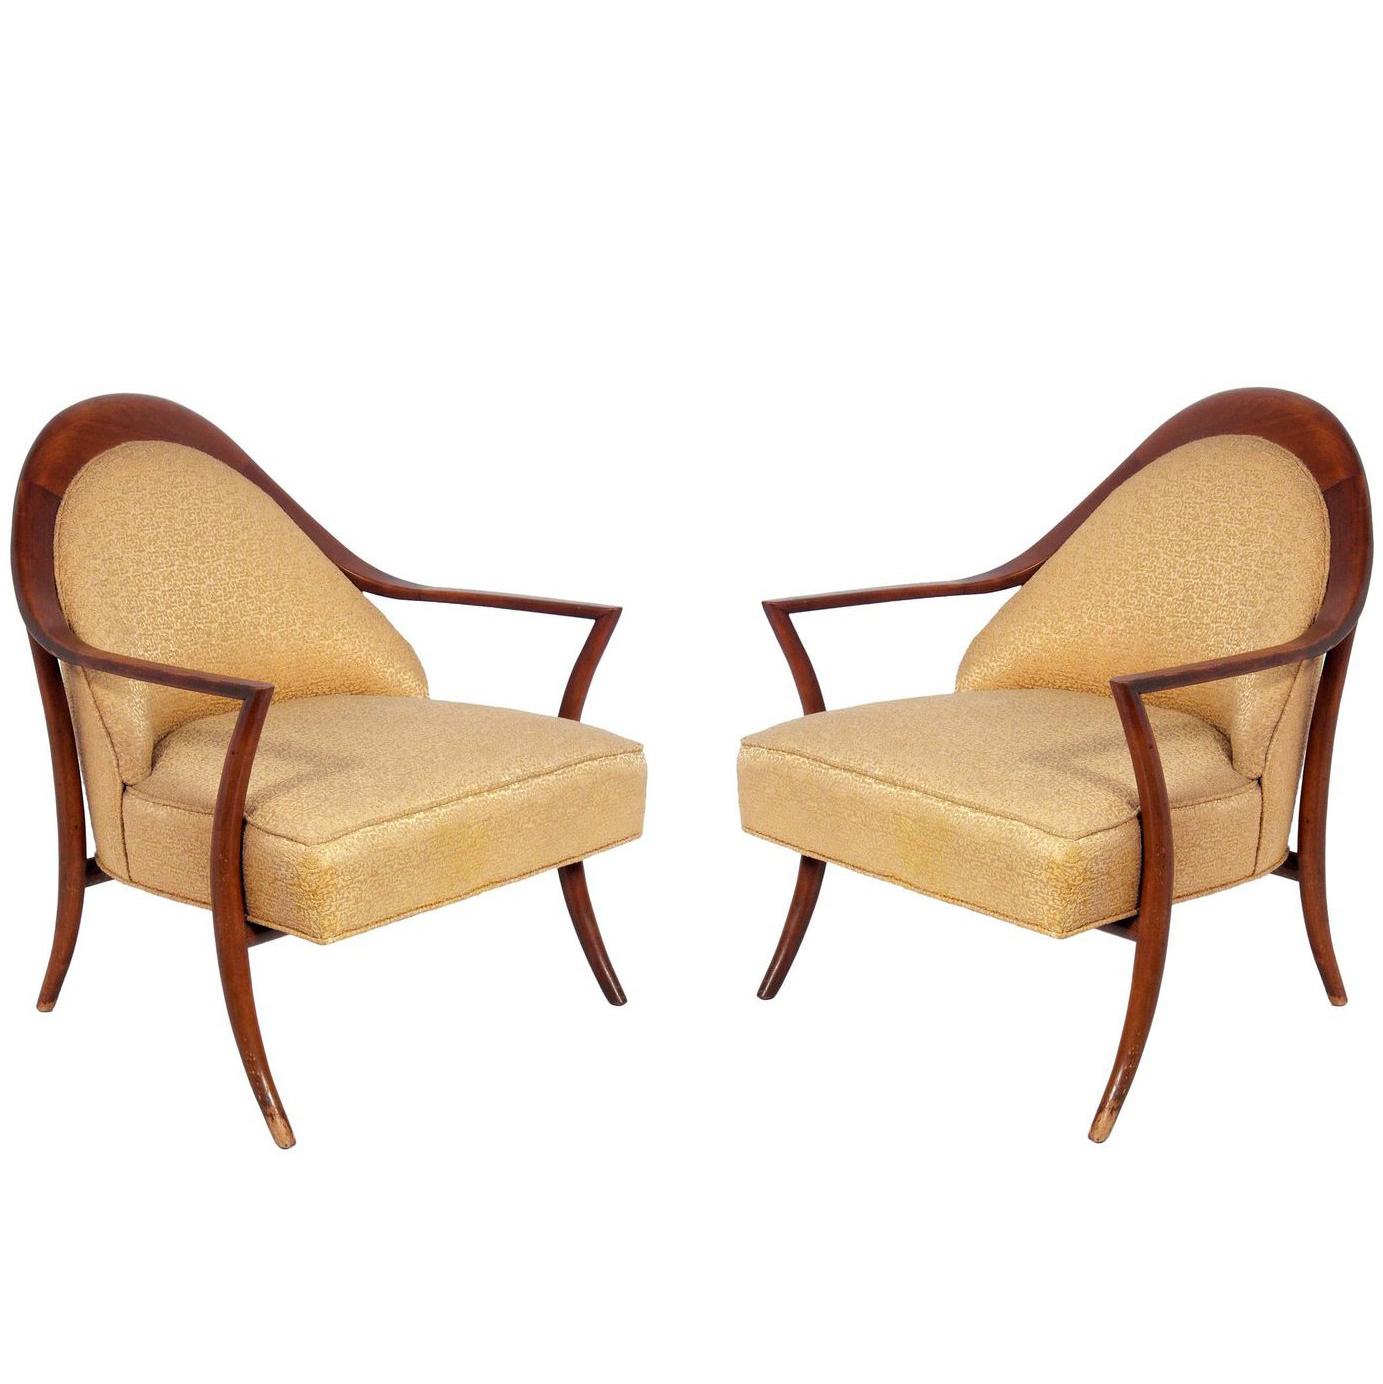 Pair of Curvaceous Lounge Chairs by T.H. Robsjohn-Gibbings